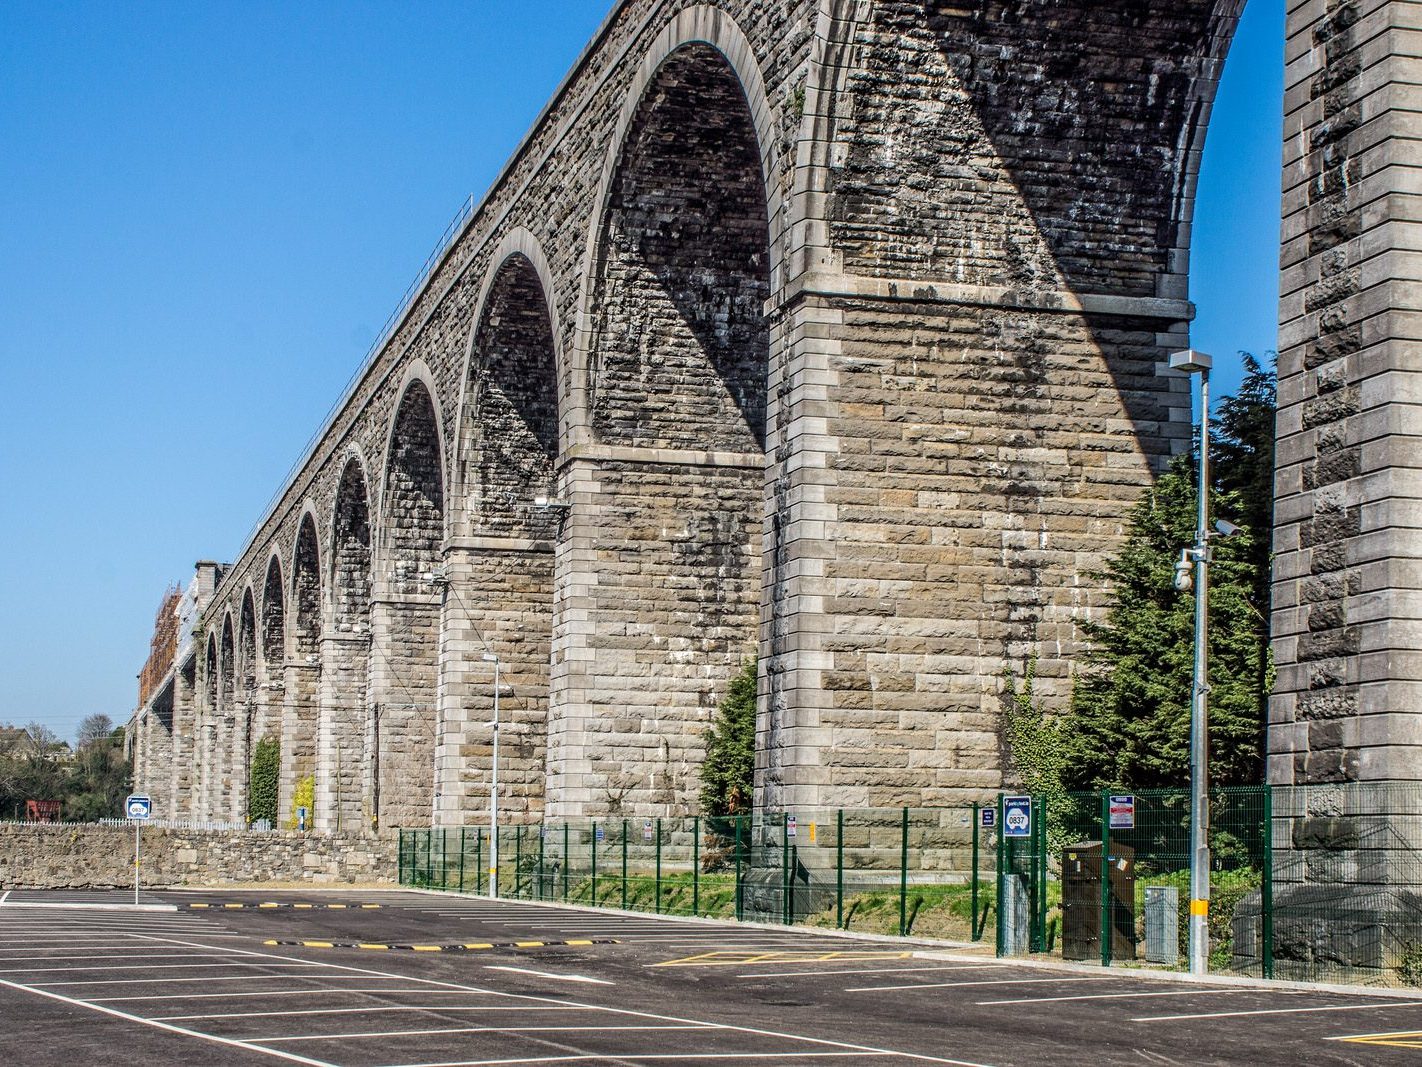 THE BOYNE VIADUCT AS IT WAS IN 2012 [RESTORATION WORK WAS UNDERWAY AT THE TIME]-224199-1